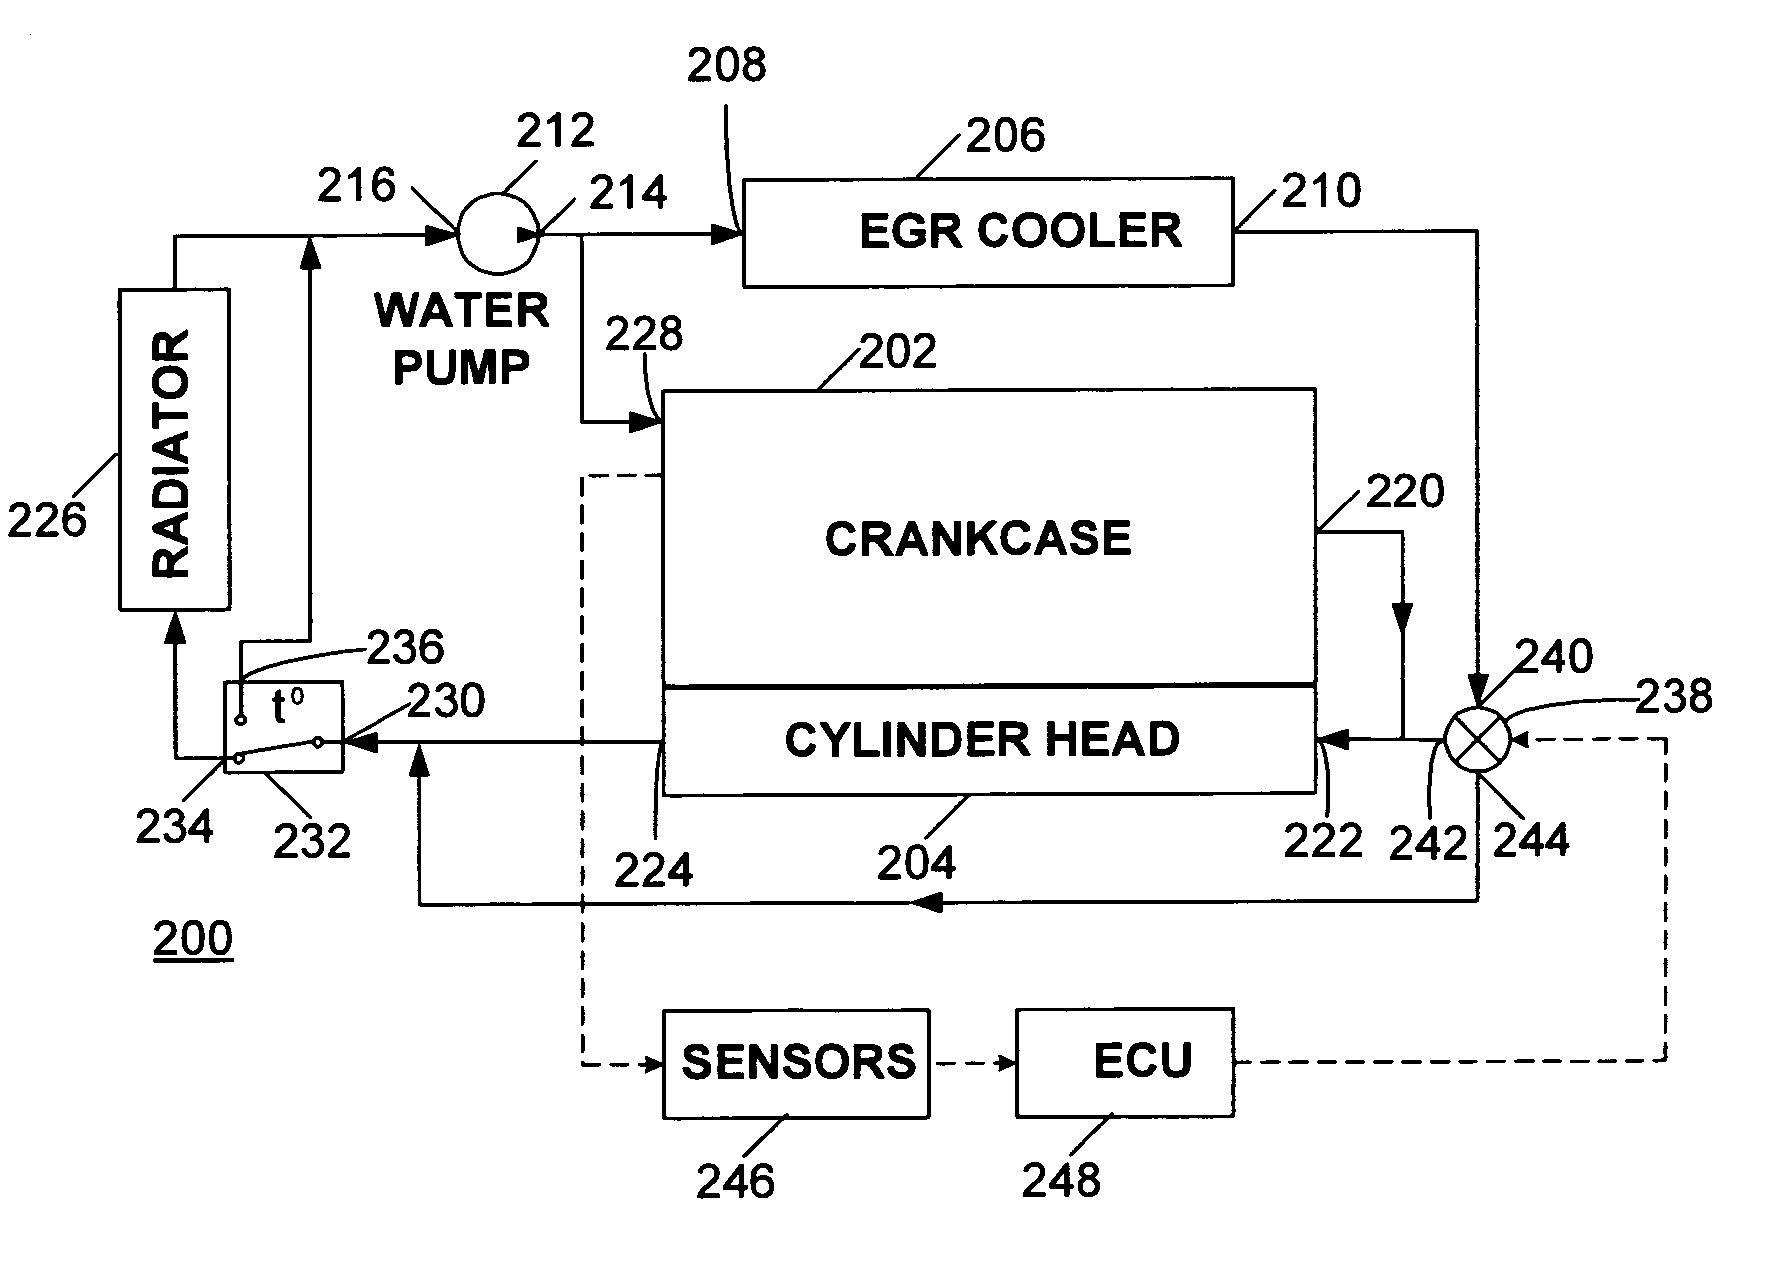 Coolant valve system for internal combustion engine and method